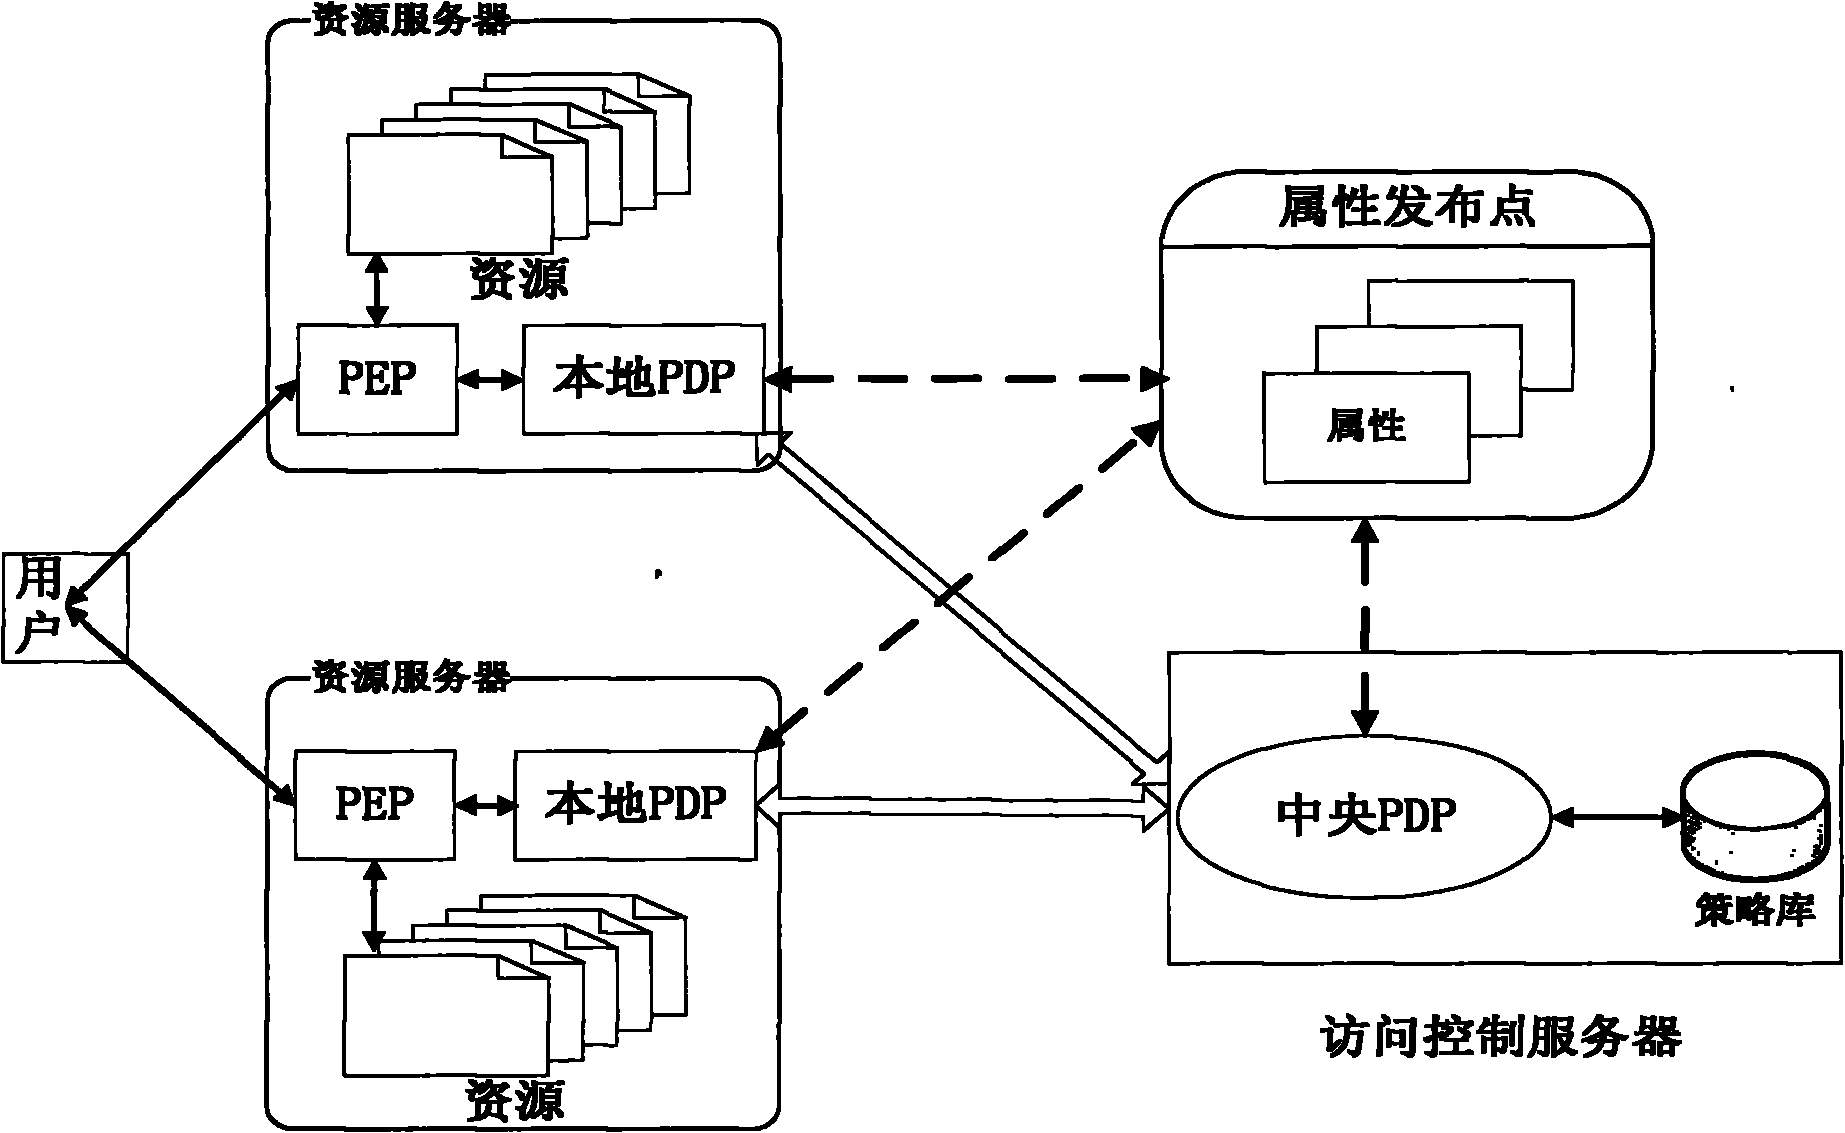 Two-level policy decision-based access control method and system